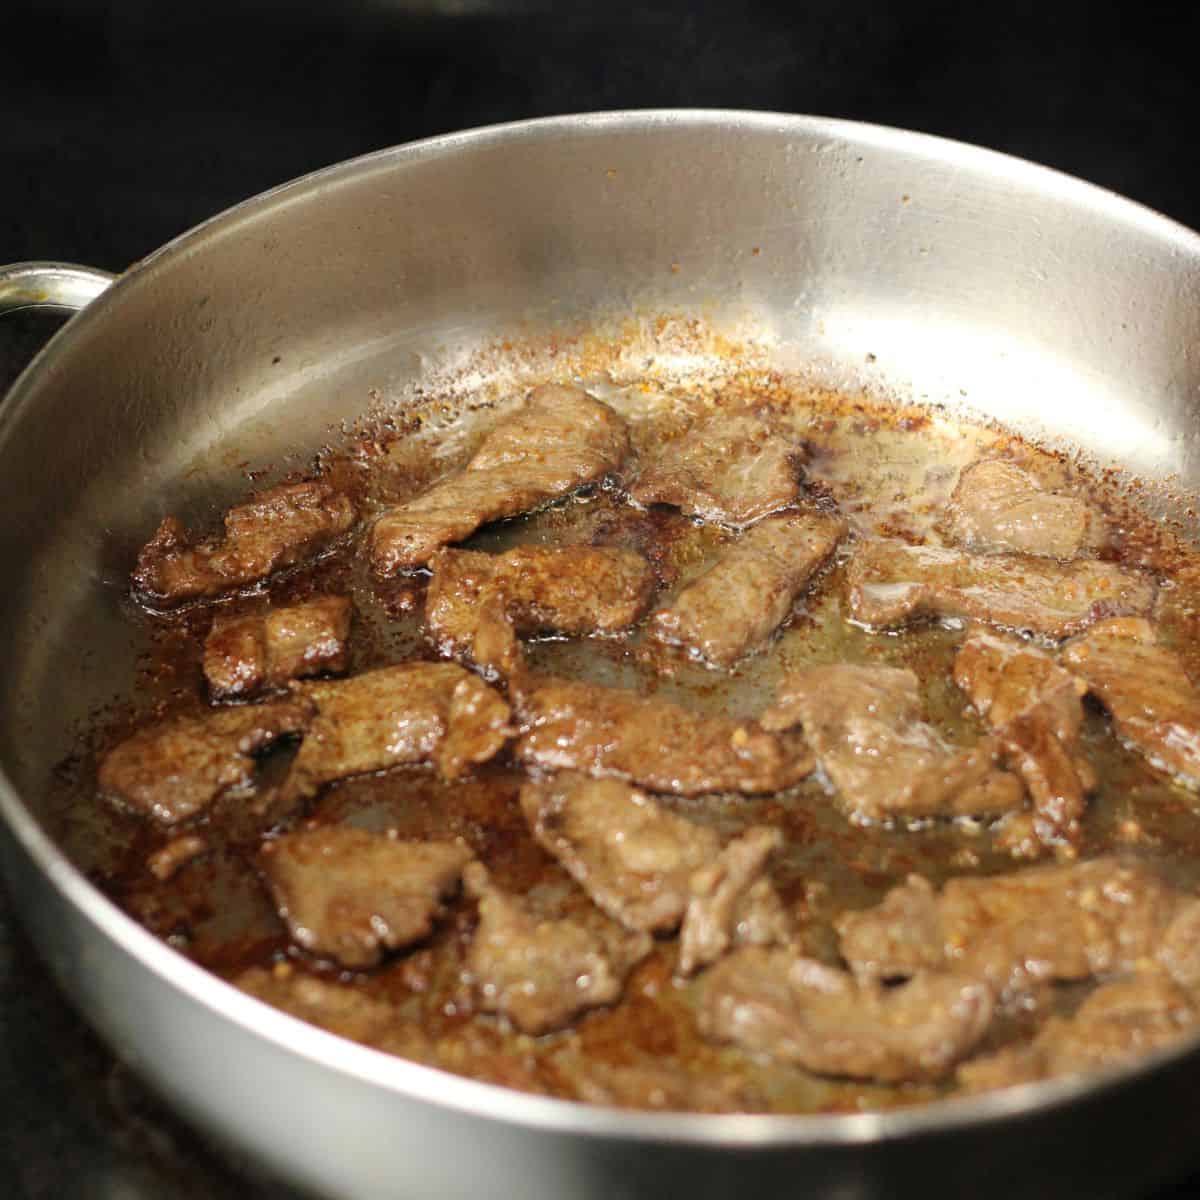 Frying the beef tapa until it is seared and caramelized.